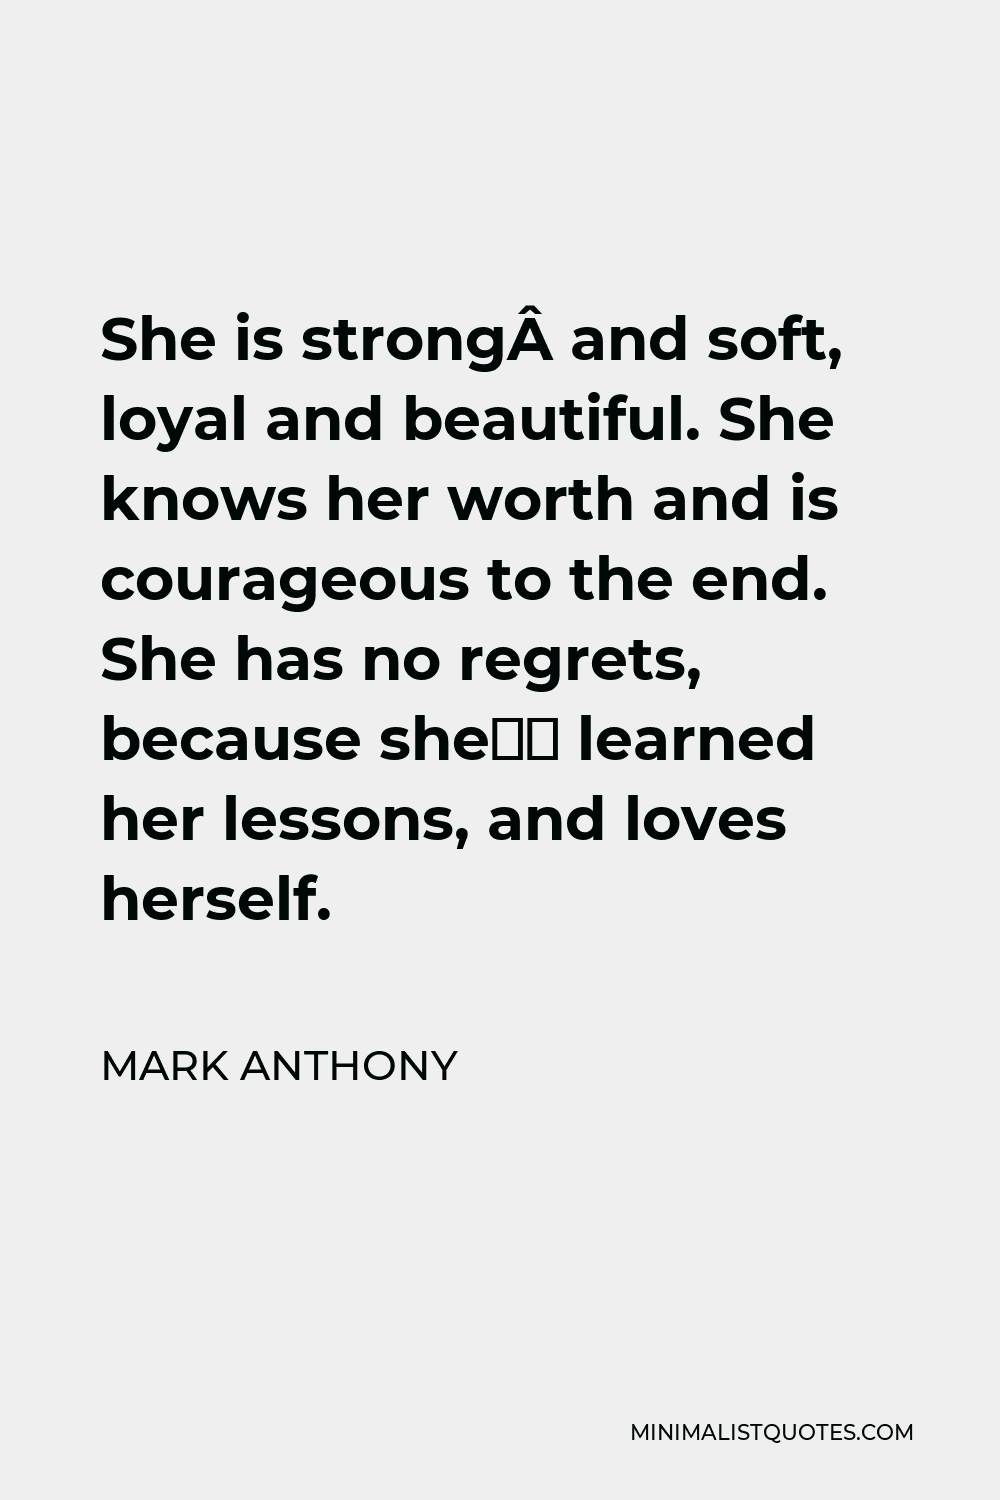 Mark Anthony Quote - She is strong and soft, loyal and beautiful. She knows her worth and is courageous to the end. She has no regrets, because she’s learned her lessons, and loves herself.